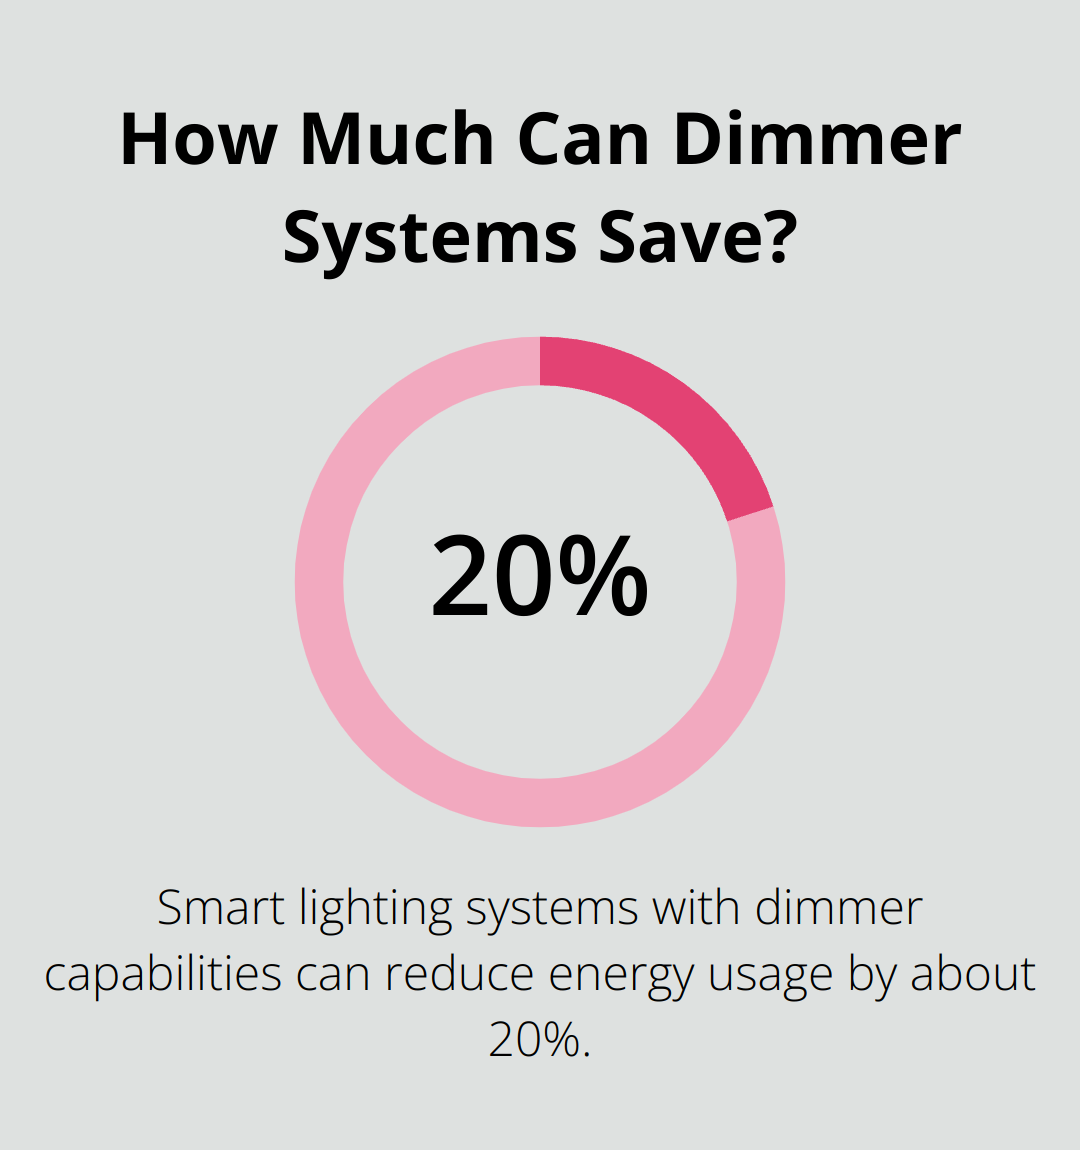 How Much Can Dimmer Systems Save?